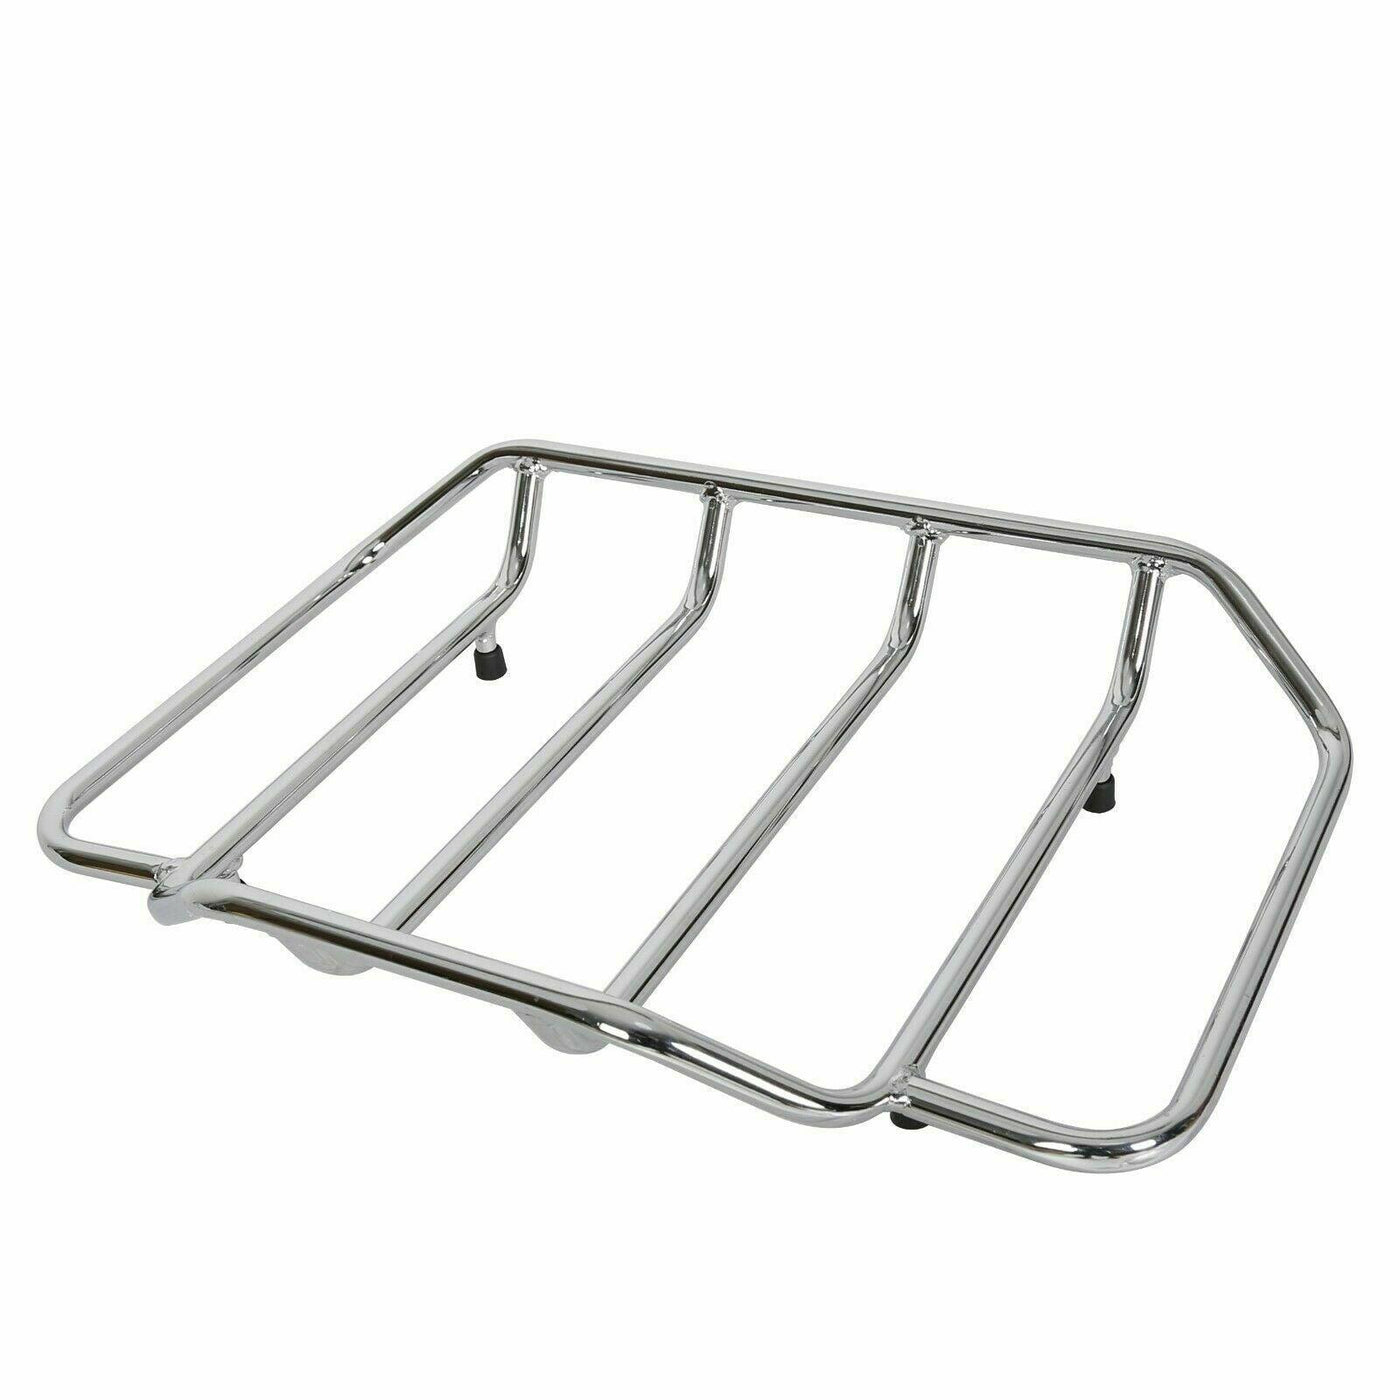 New Chromed Tour Pack Top luggage Rack Rail For Harley touring Trunk Pak FL - Moto Life Products